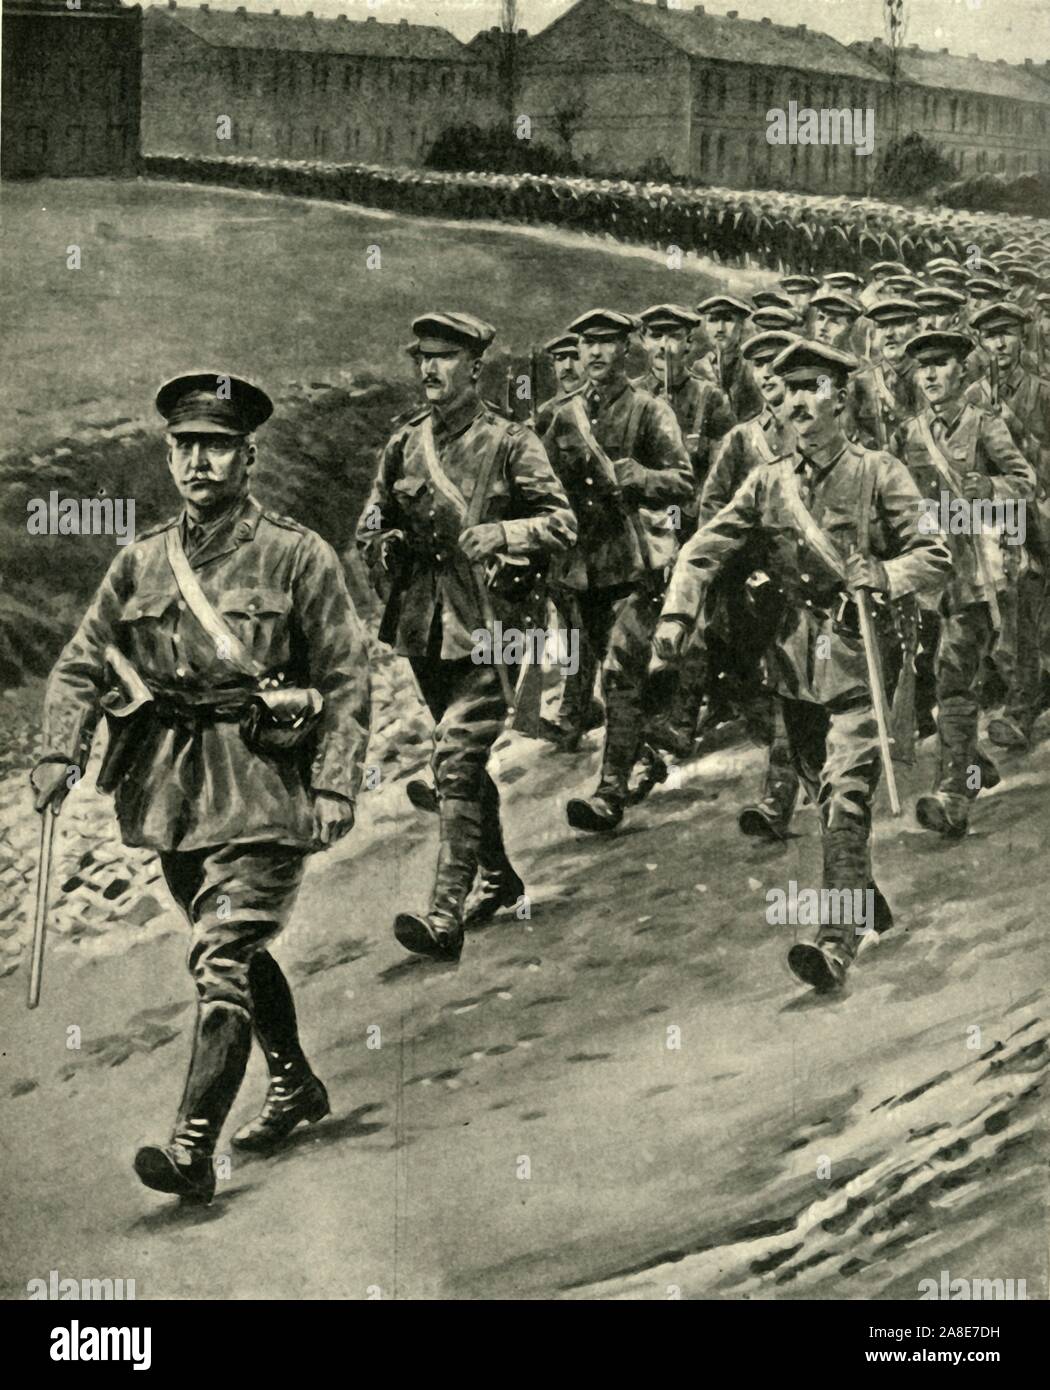 Captain William Redmond leading Irish troops at the Front, First World War, 1916, (c1920). 'While the Sinn Feiners were rebelling in Ireland: Captain William Redmond, M.P. [1886-1932], brother of Mr. John Redmond, leading Irish troops at the Front...&quot;Is it not an additional horror&quot;, said the Irish leader, Mr. John Redmond, &quot;that on the very day when we hear that men of the Dublin Fusiliers have been killed by Irishmen in the streets of Dublin, we receive the news of how the men of the 16th division - our own Irish Brigade, and of the same Dublin Fusiliers - had dashed forward an Stock Photo